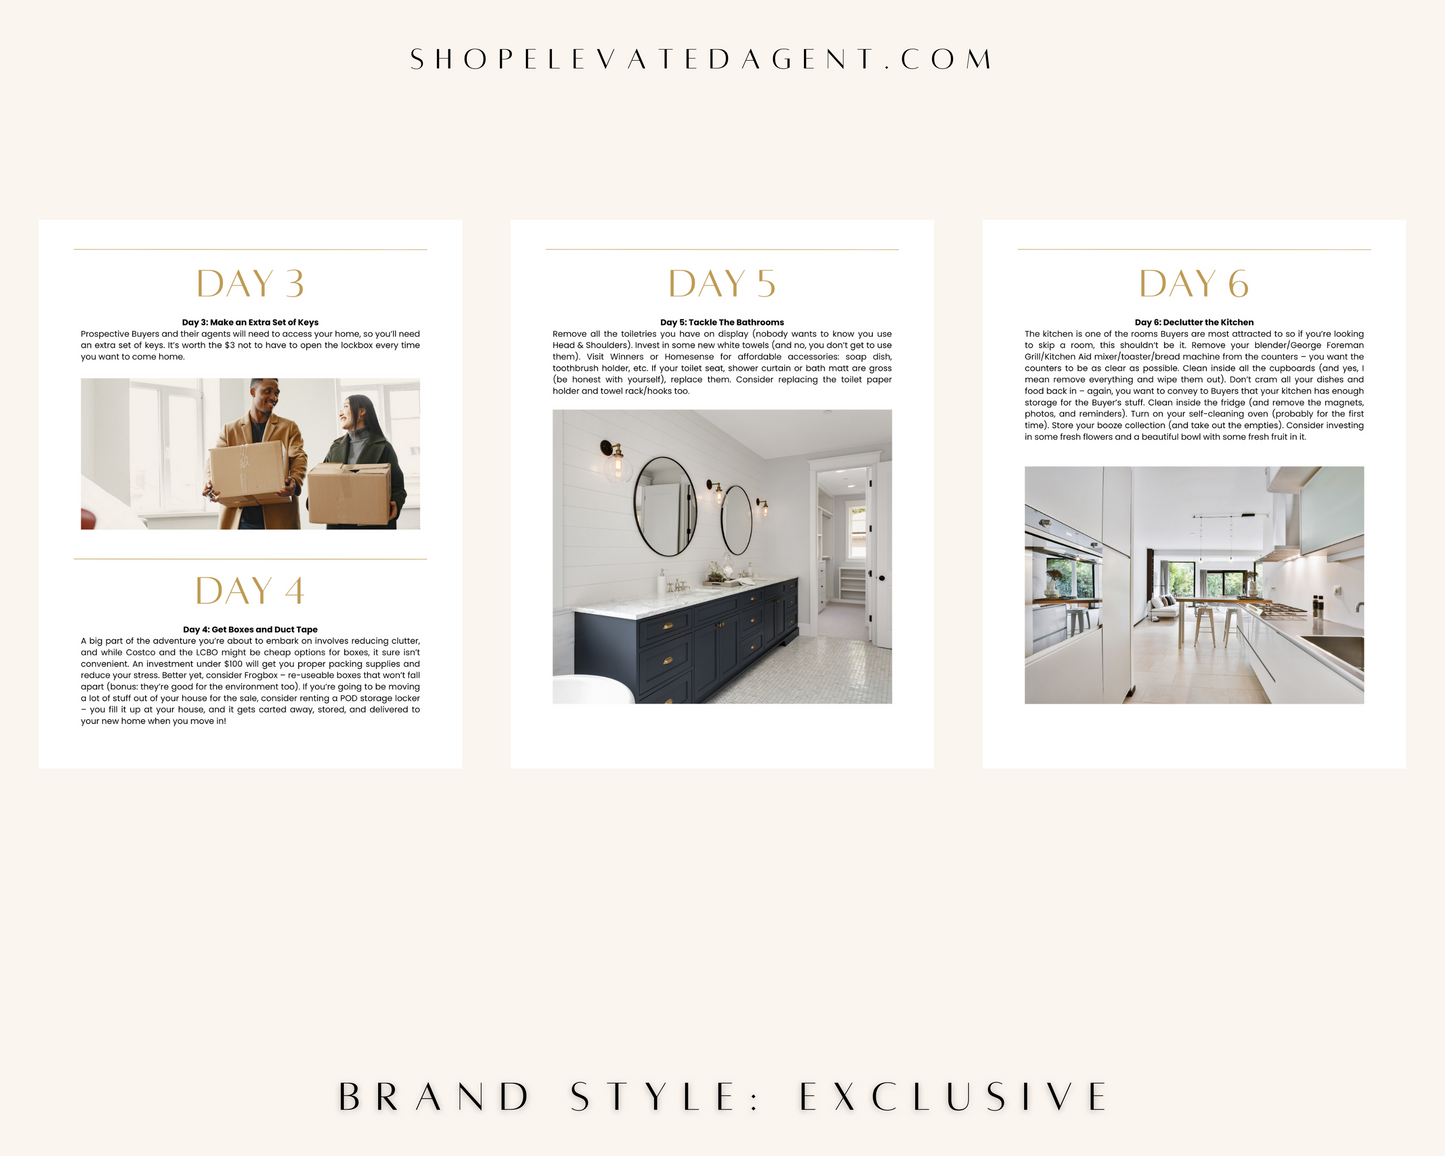 Preparing Your House to Sell - Exclusive Brand Style